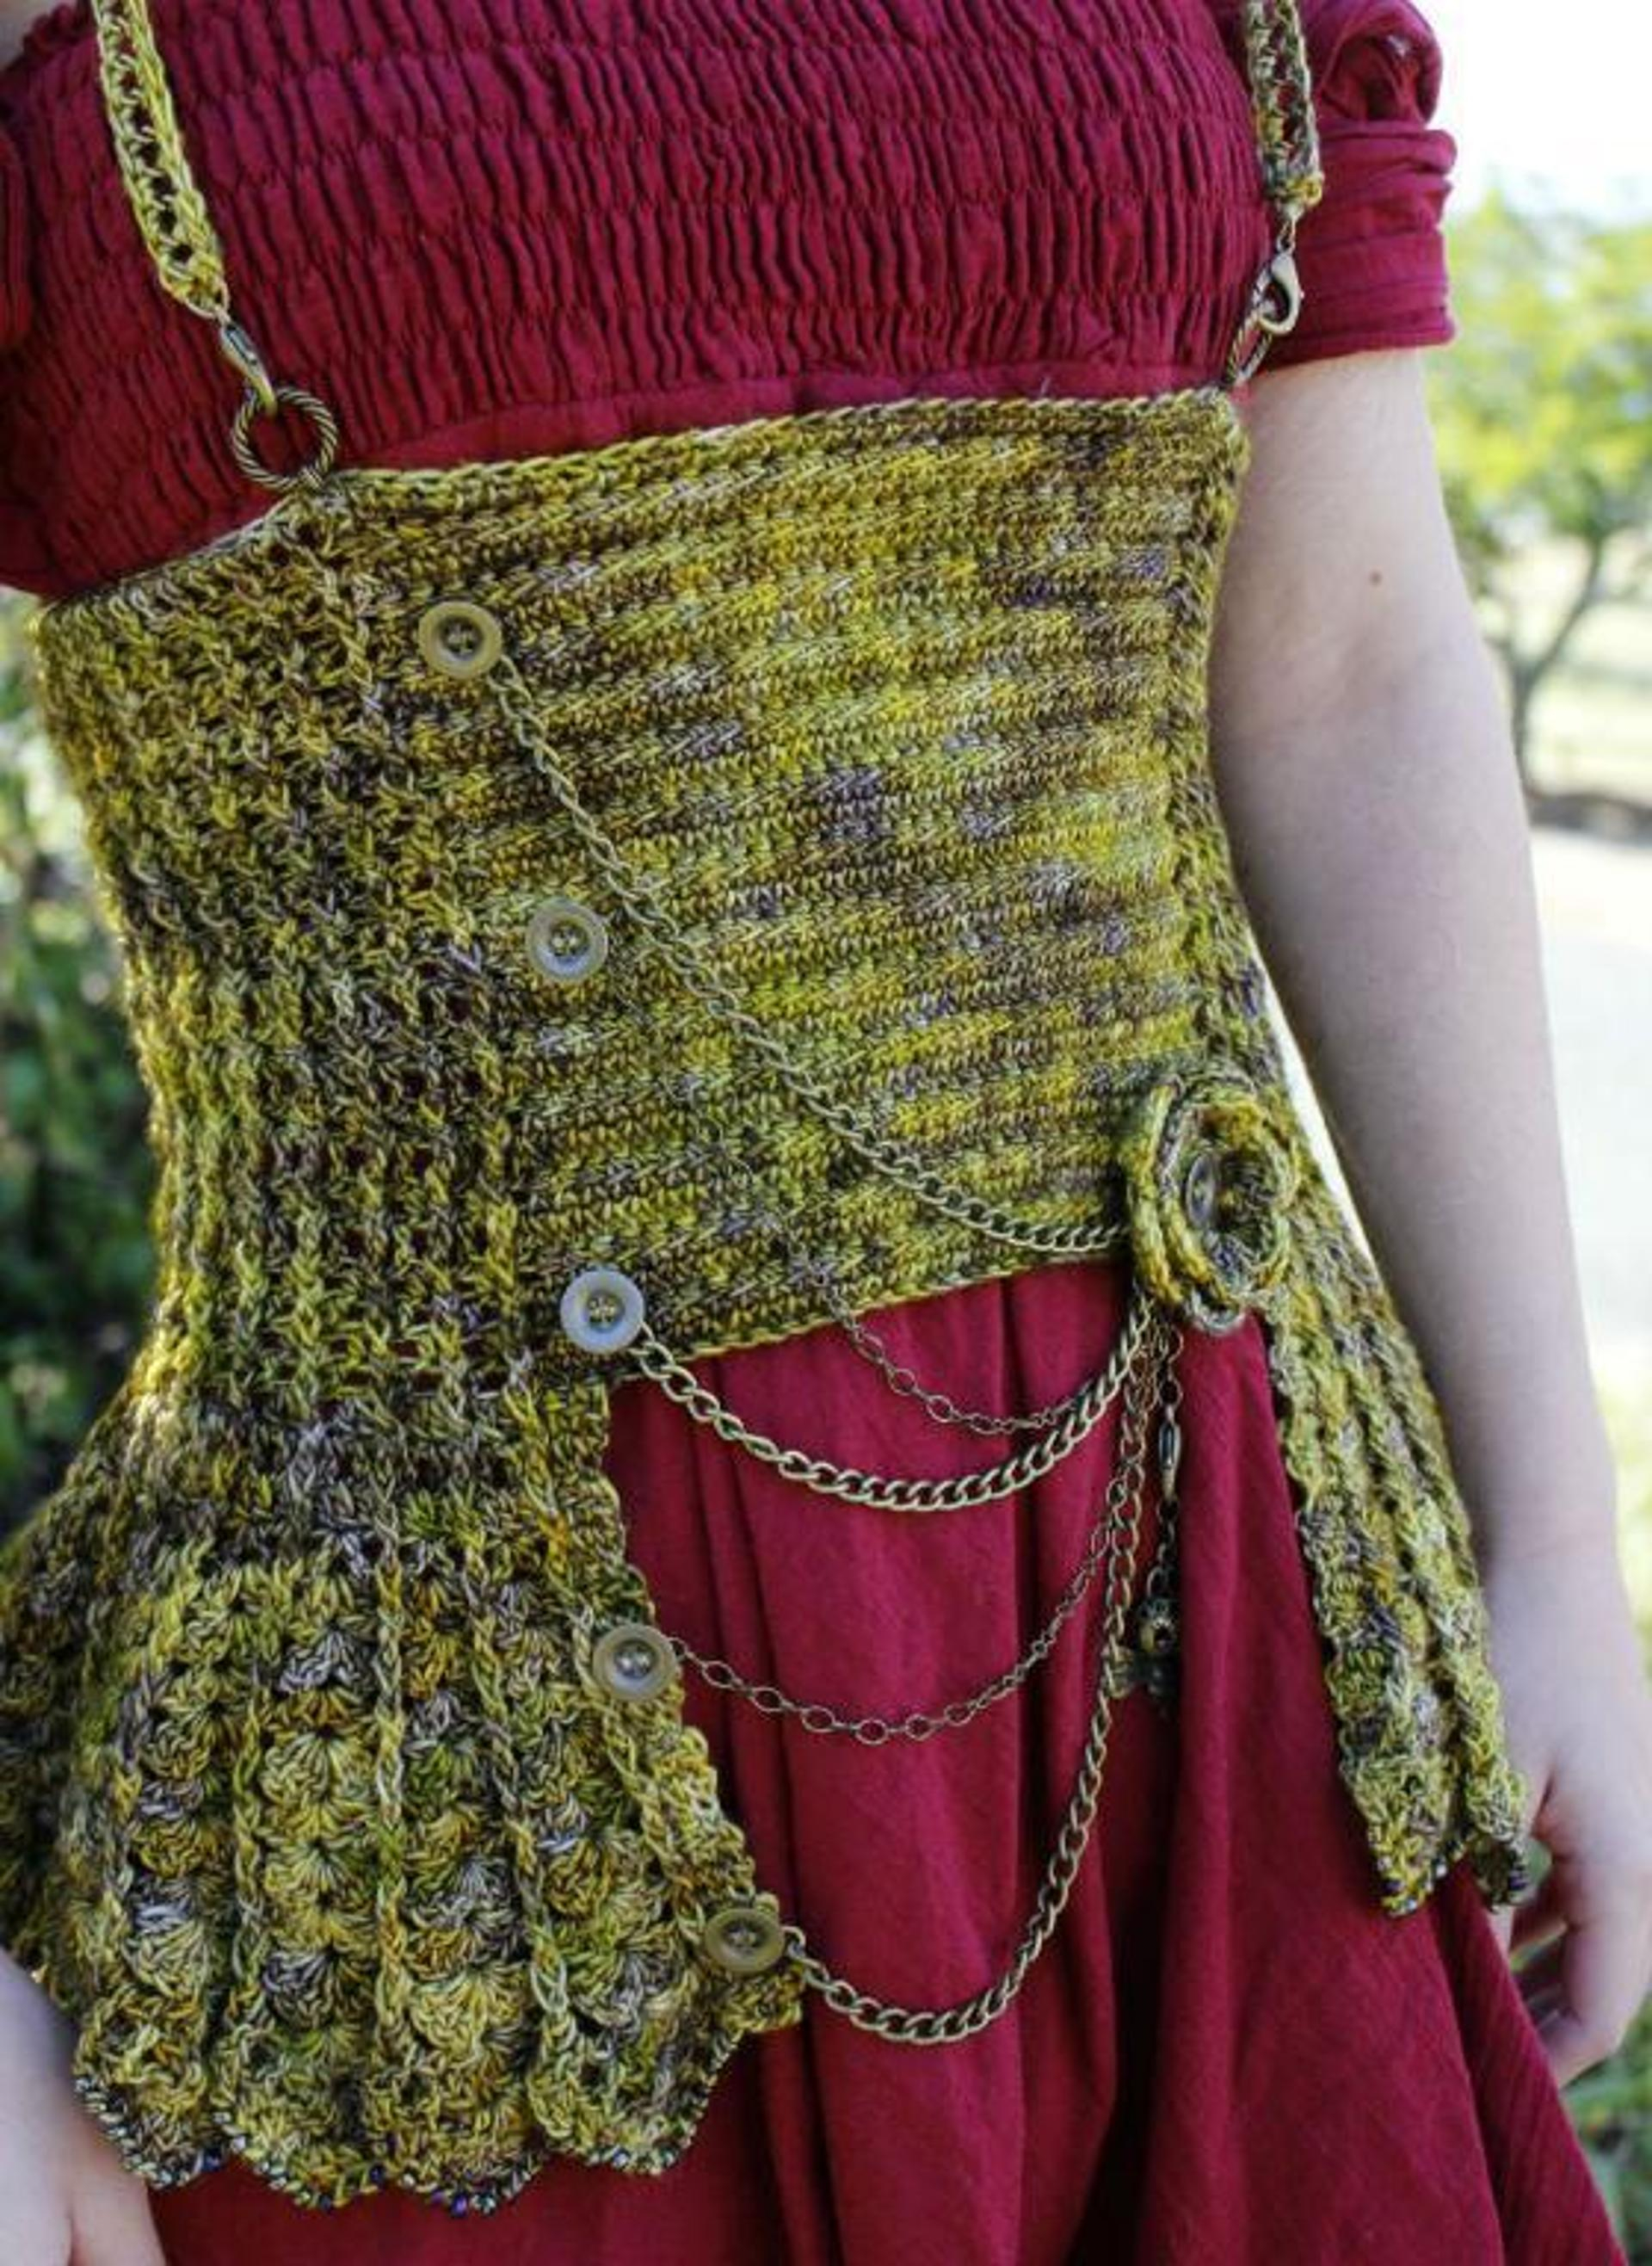 Unusual Knitting Patterns 17 Unusual Unique Crochet Patterns To Shake Things Up